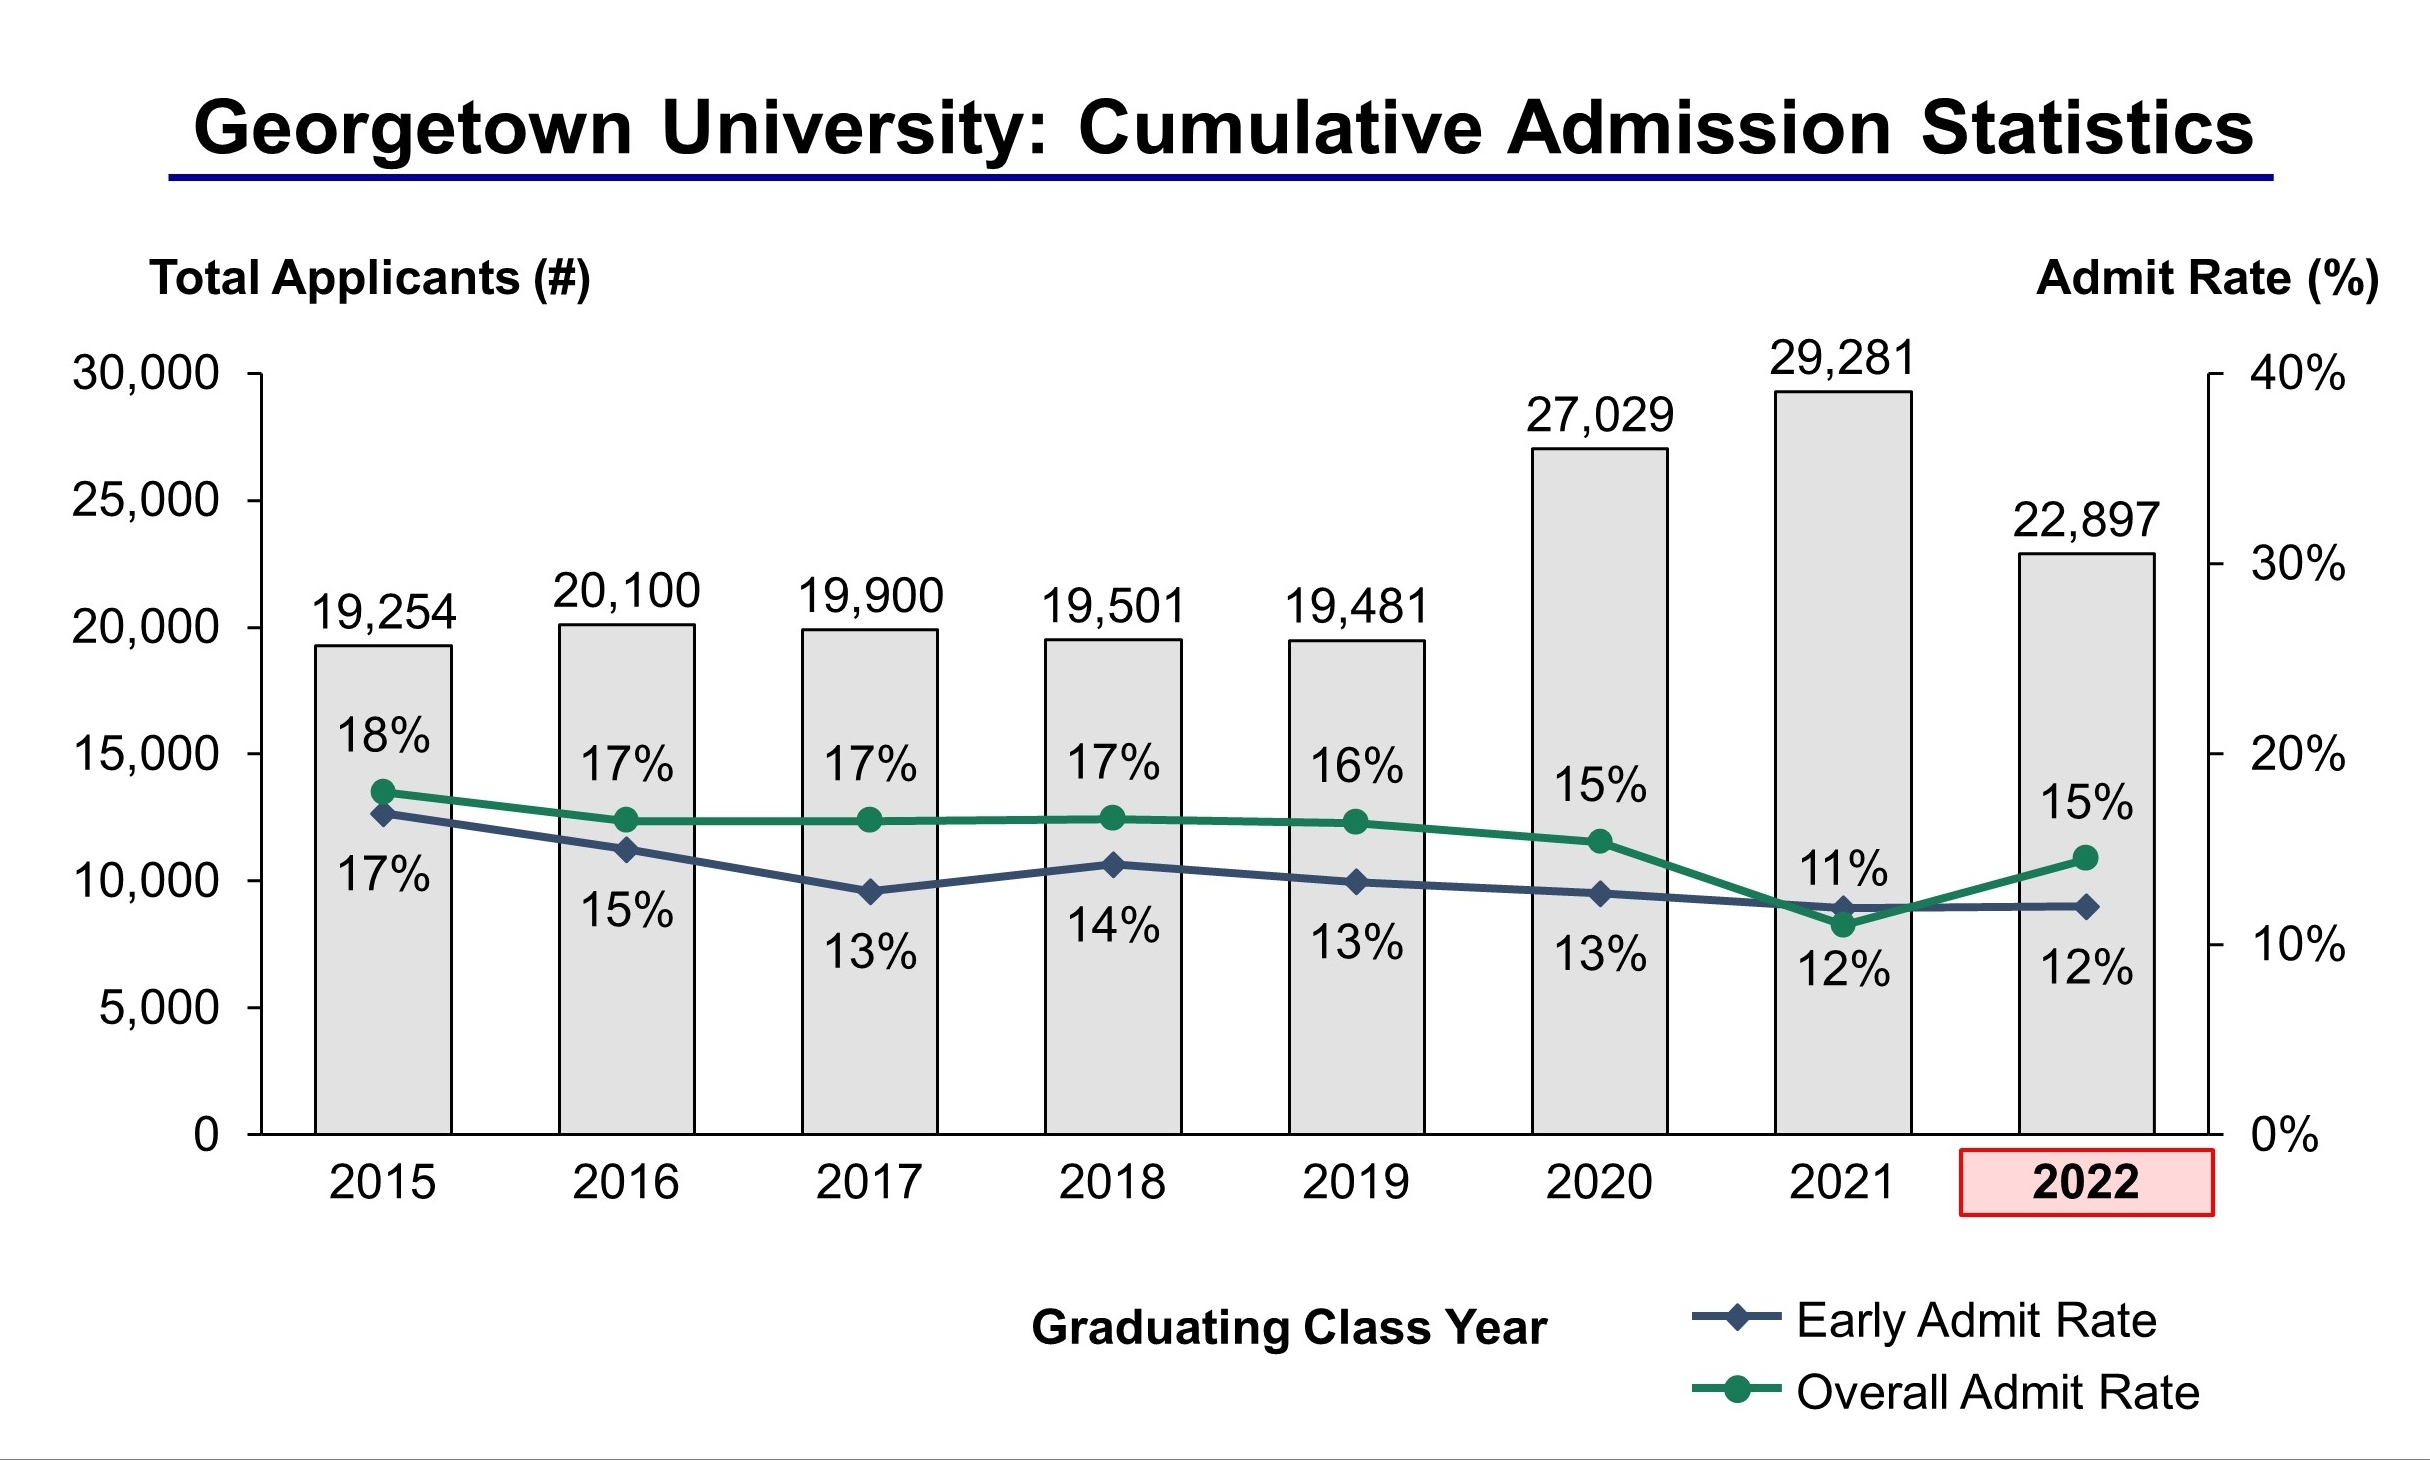 University Acceptance Rate and Admission Statistics